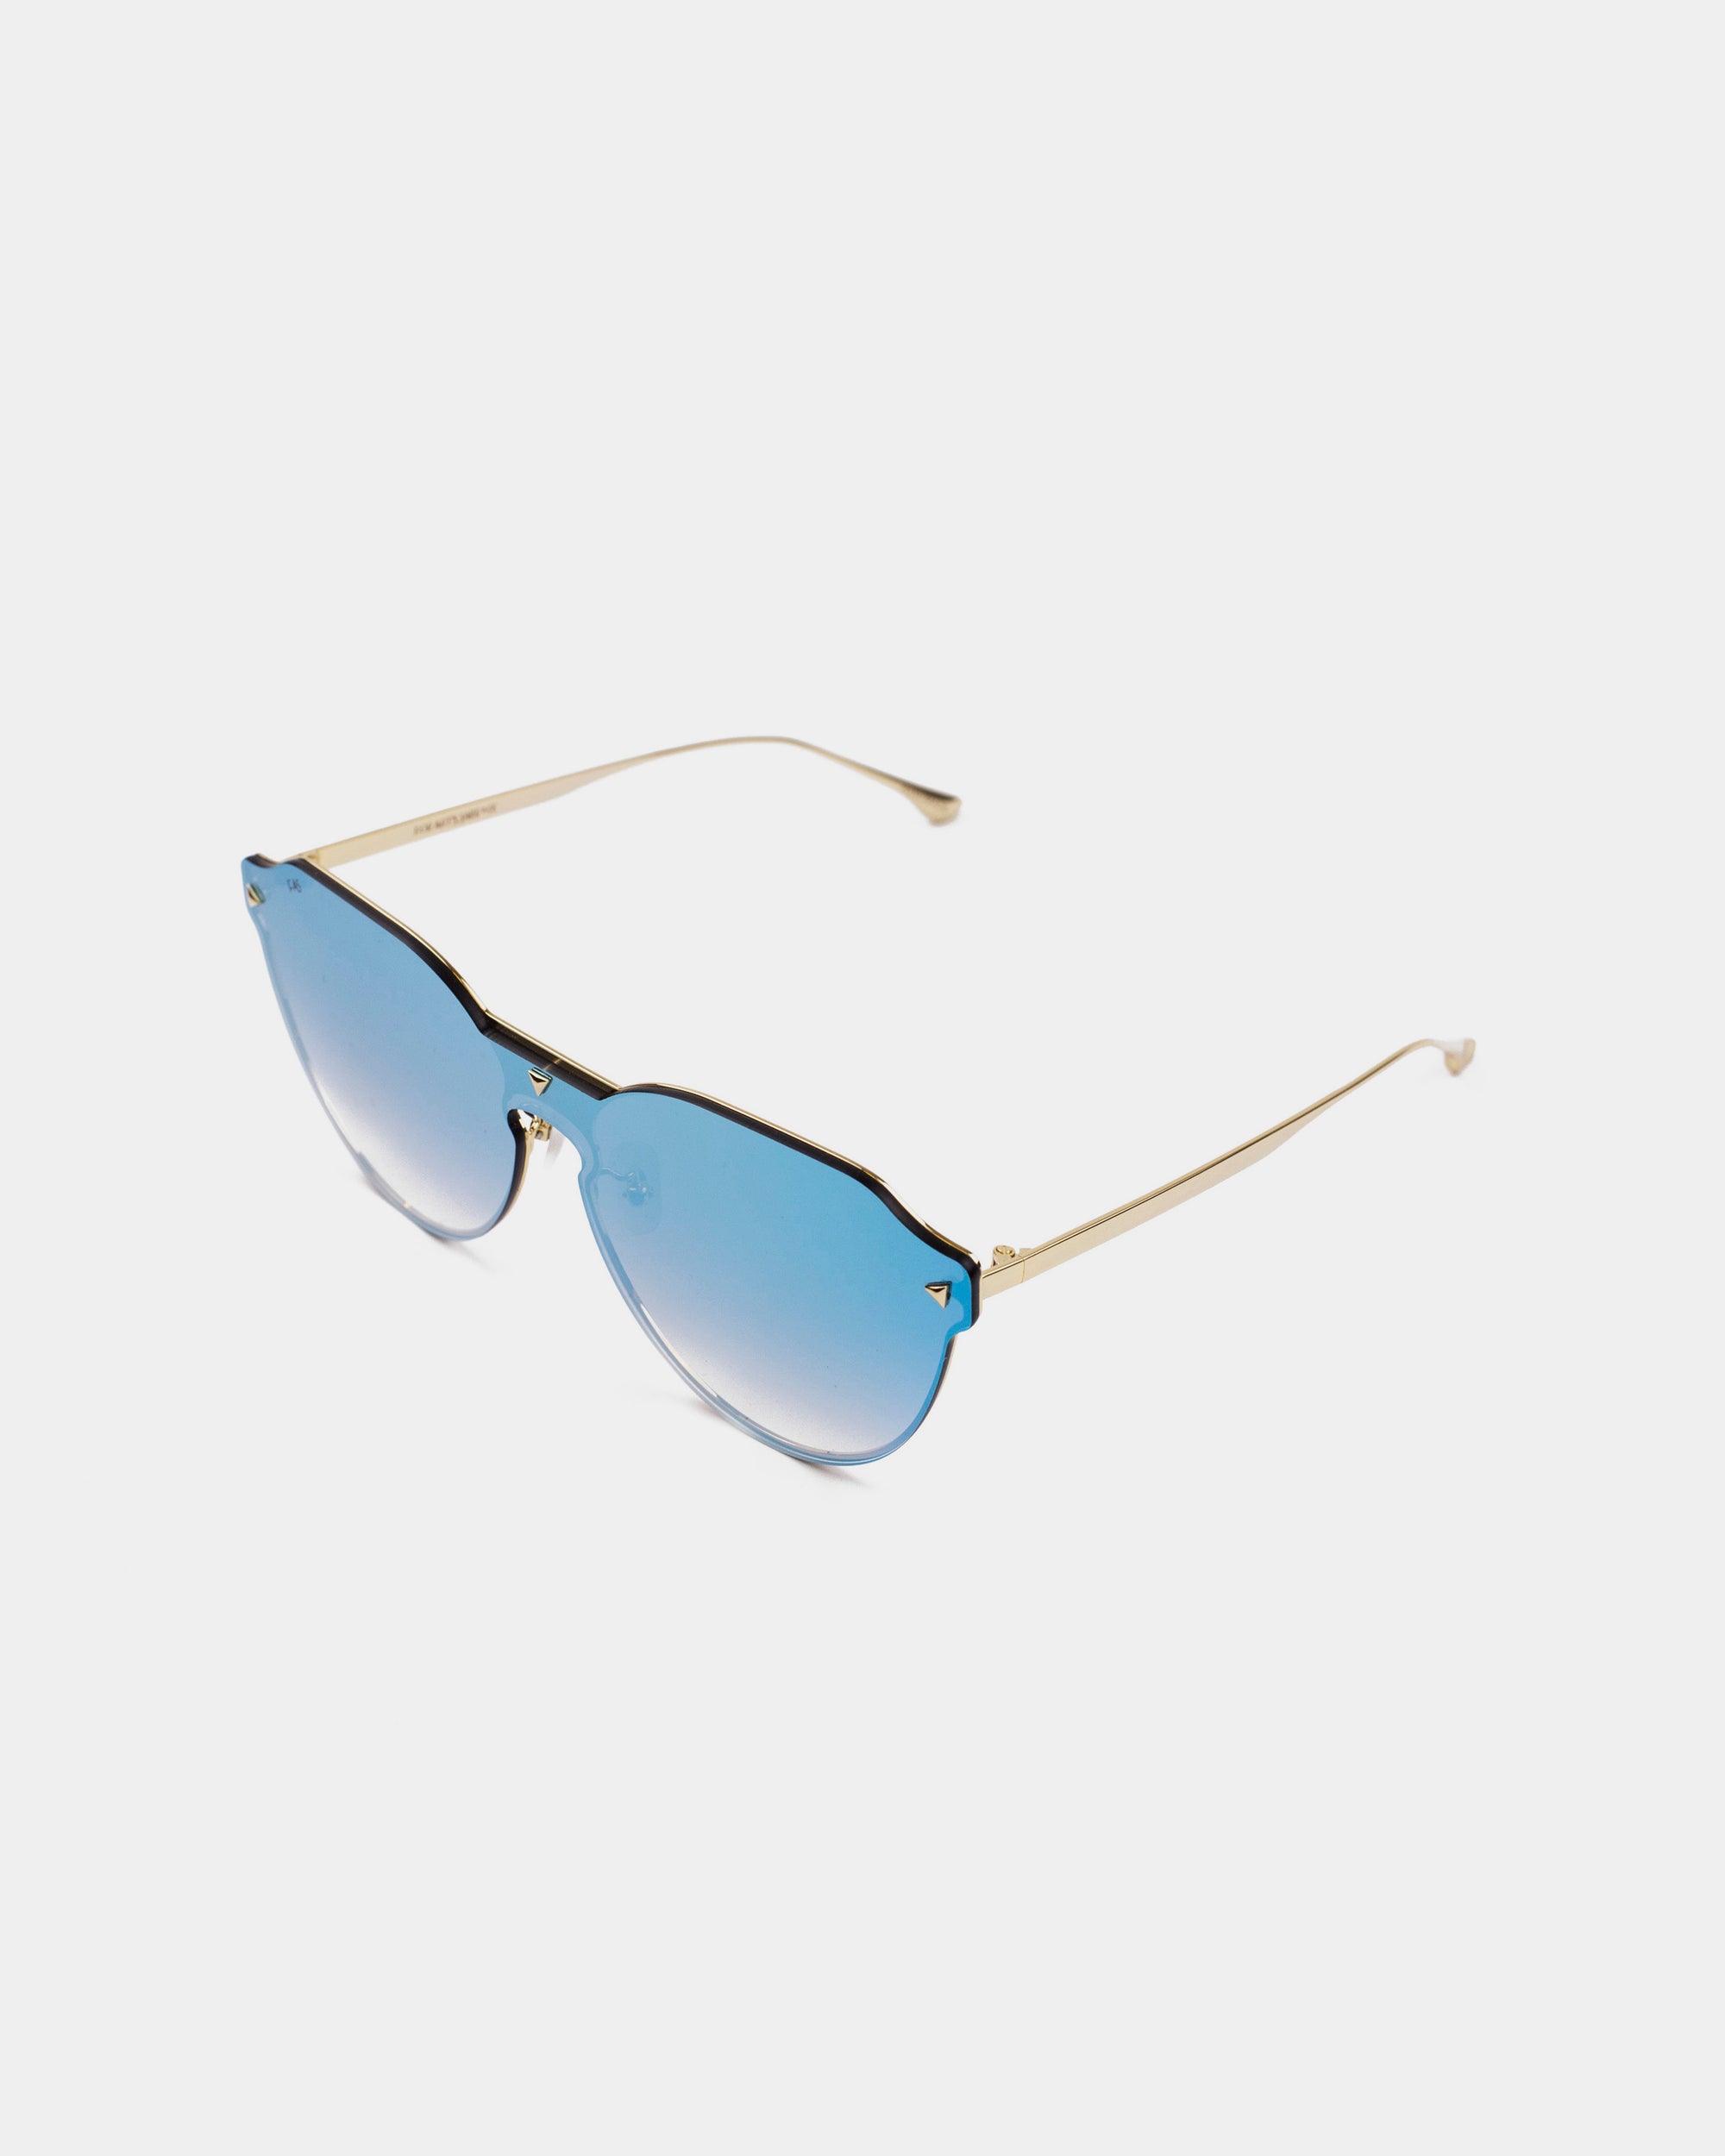 A pair of stylish sunglasses featuring thin gold frames with 18-karat gold plating and blue-tinted lenses. The design is modern and minimalist, with a sleek and lightweight appearance. The nylon lenses offer UV protection, ensuring both style and functionality. The background is plain white. These are the Error 404 by For Art&#39;s Sake®.